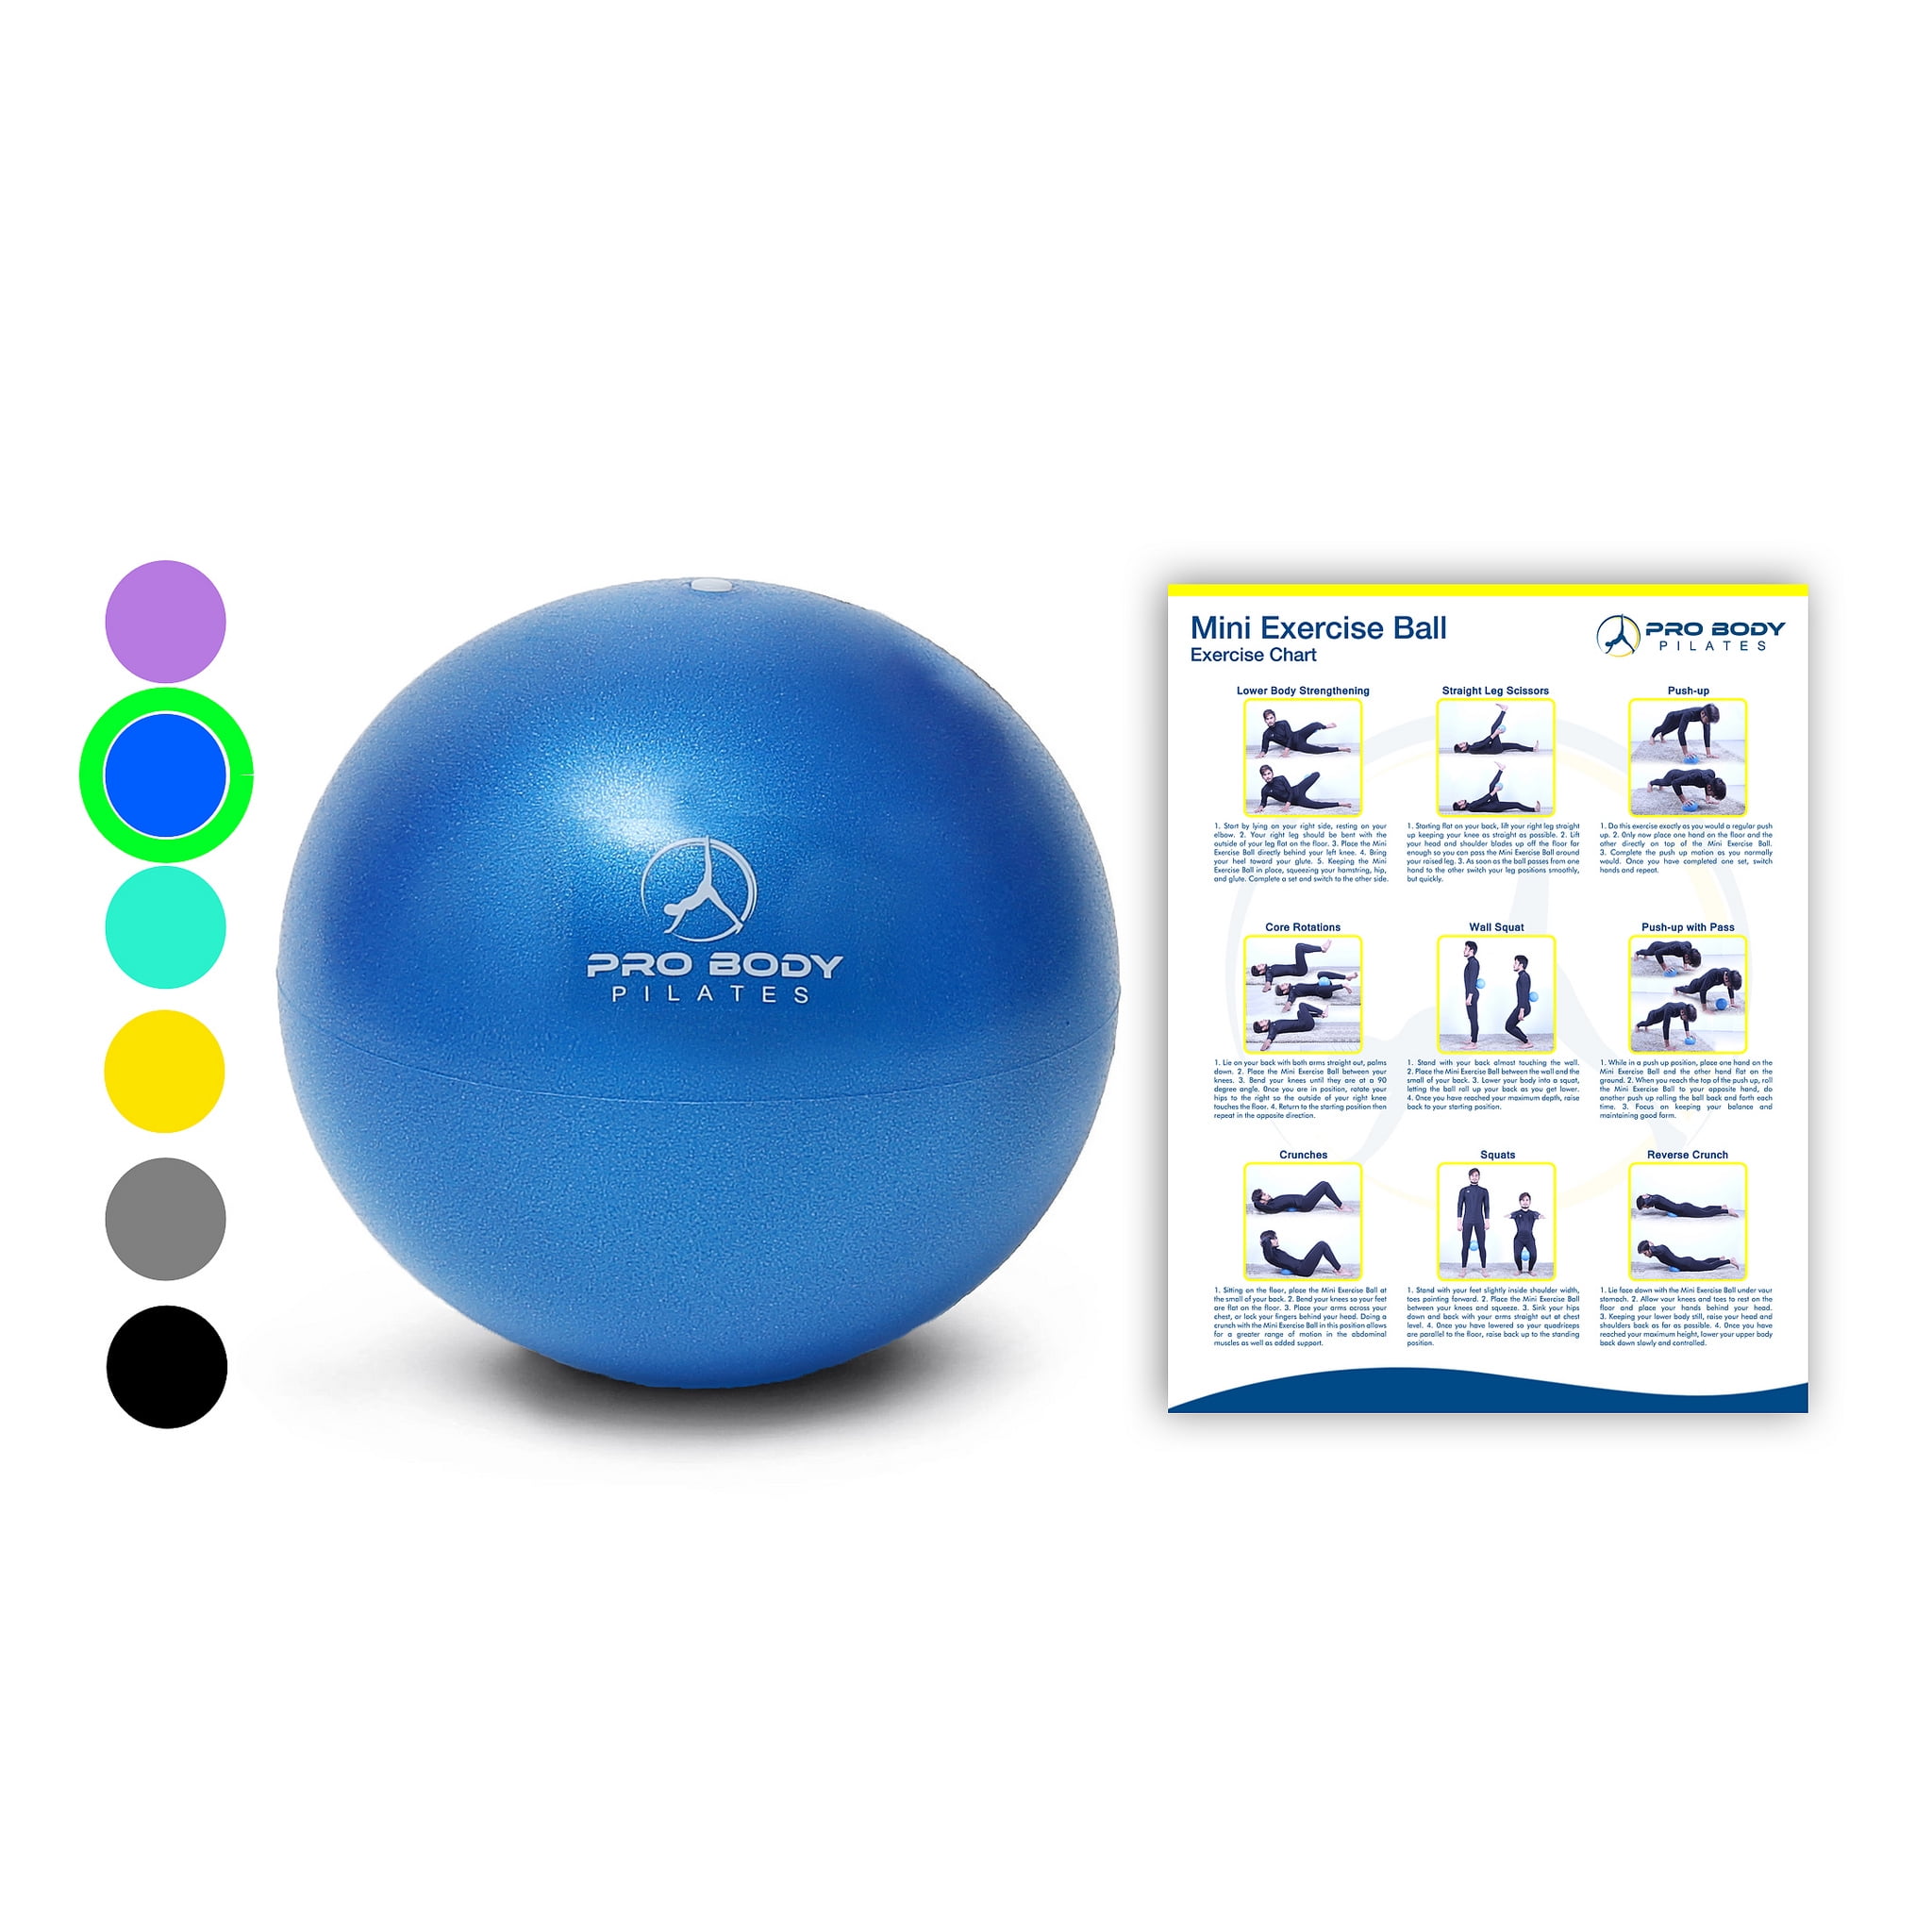 Mini Exercise Ball - 9 Inch Small Bender Ball for Stability, Barre,  Pilates, Yoga, Core Training and Physical Therapy